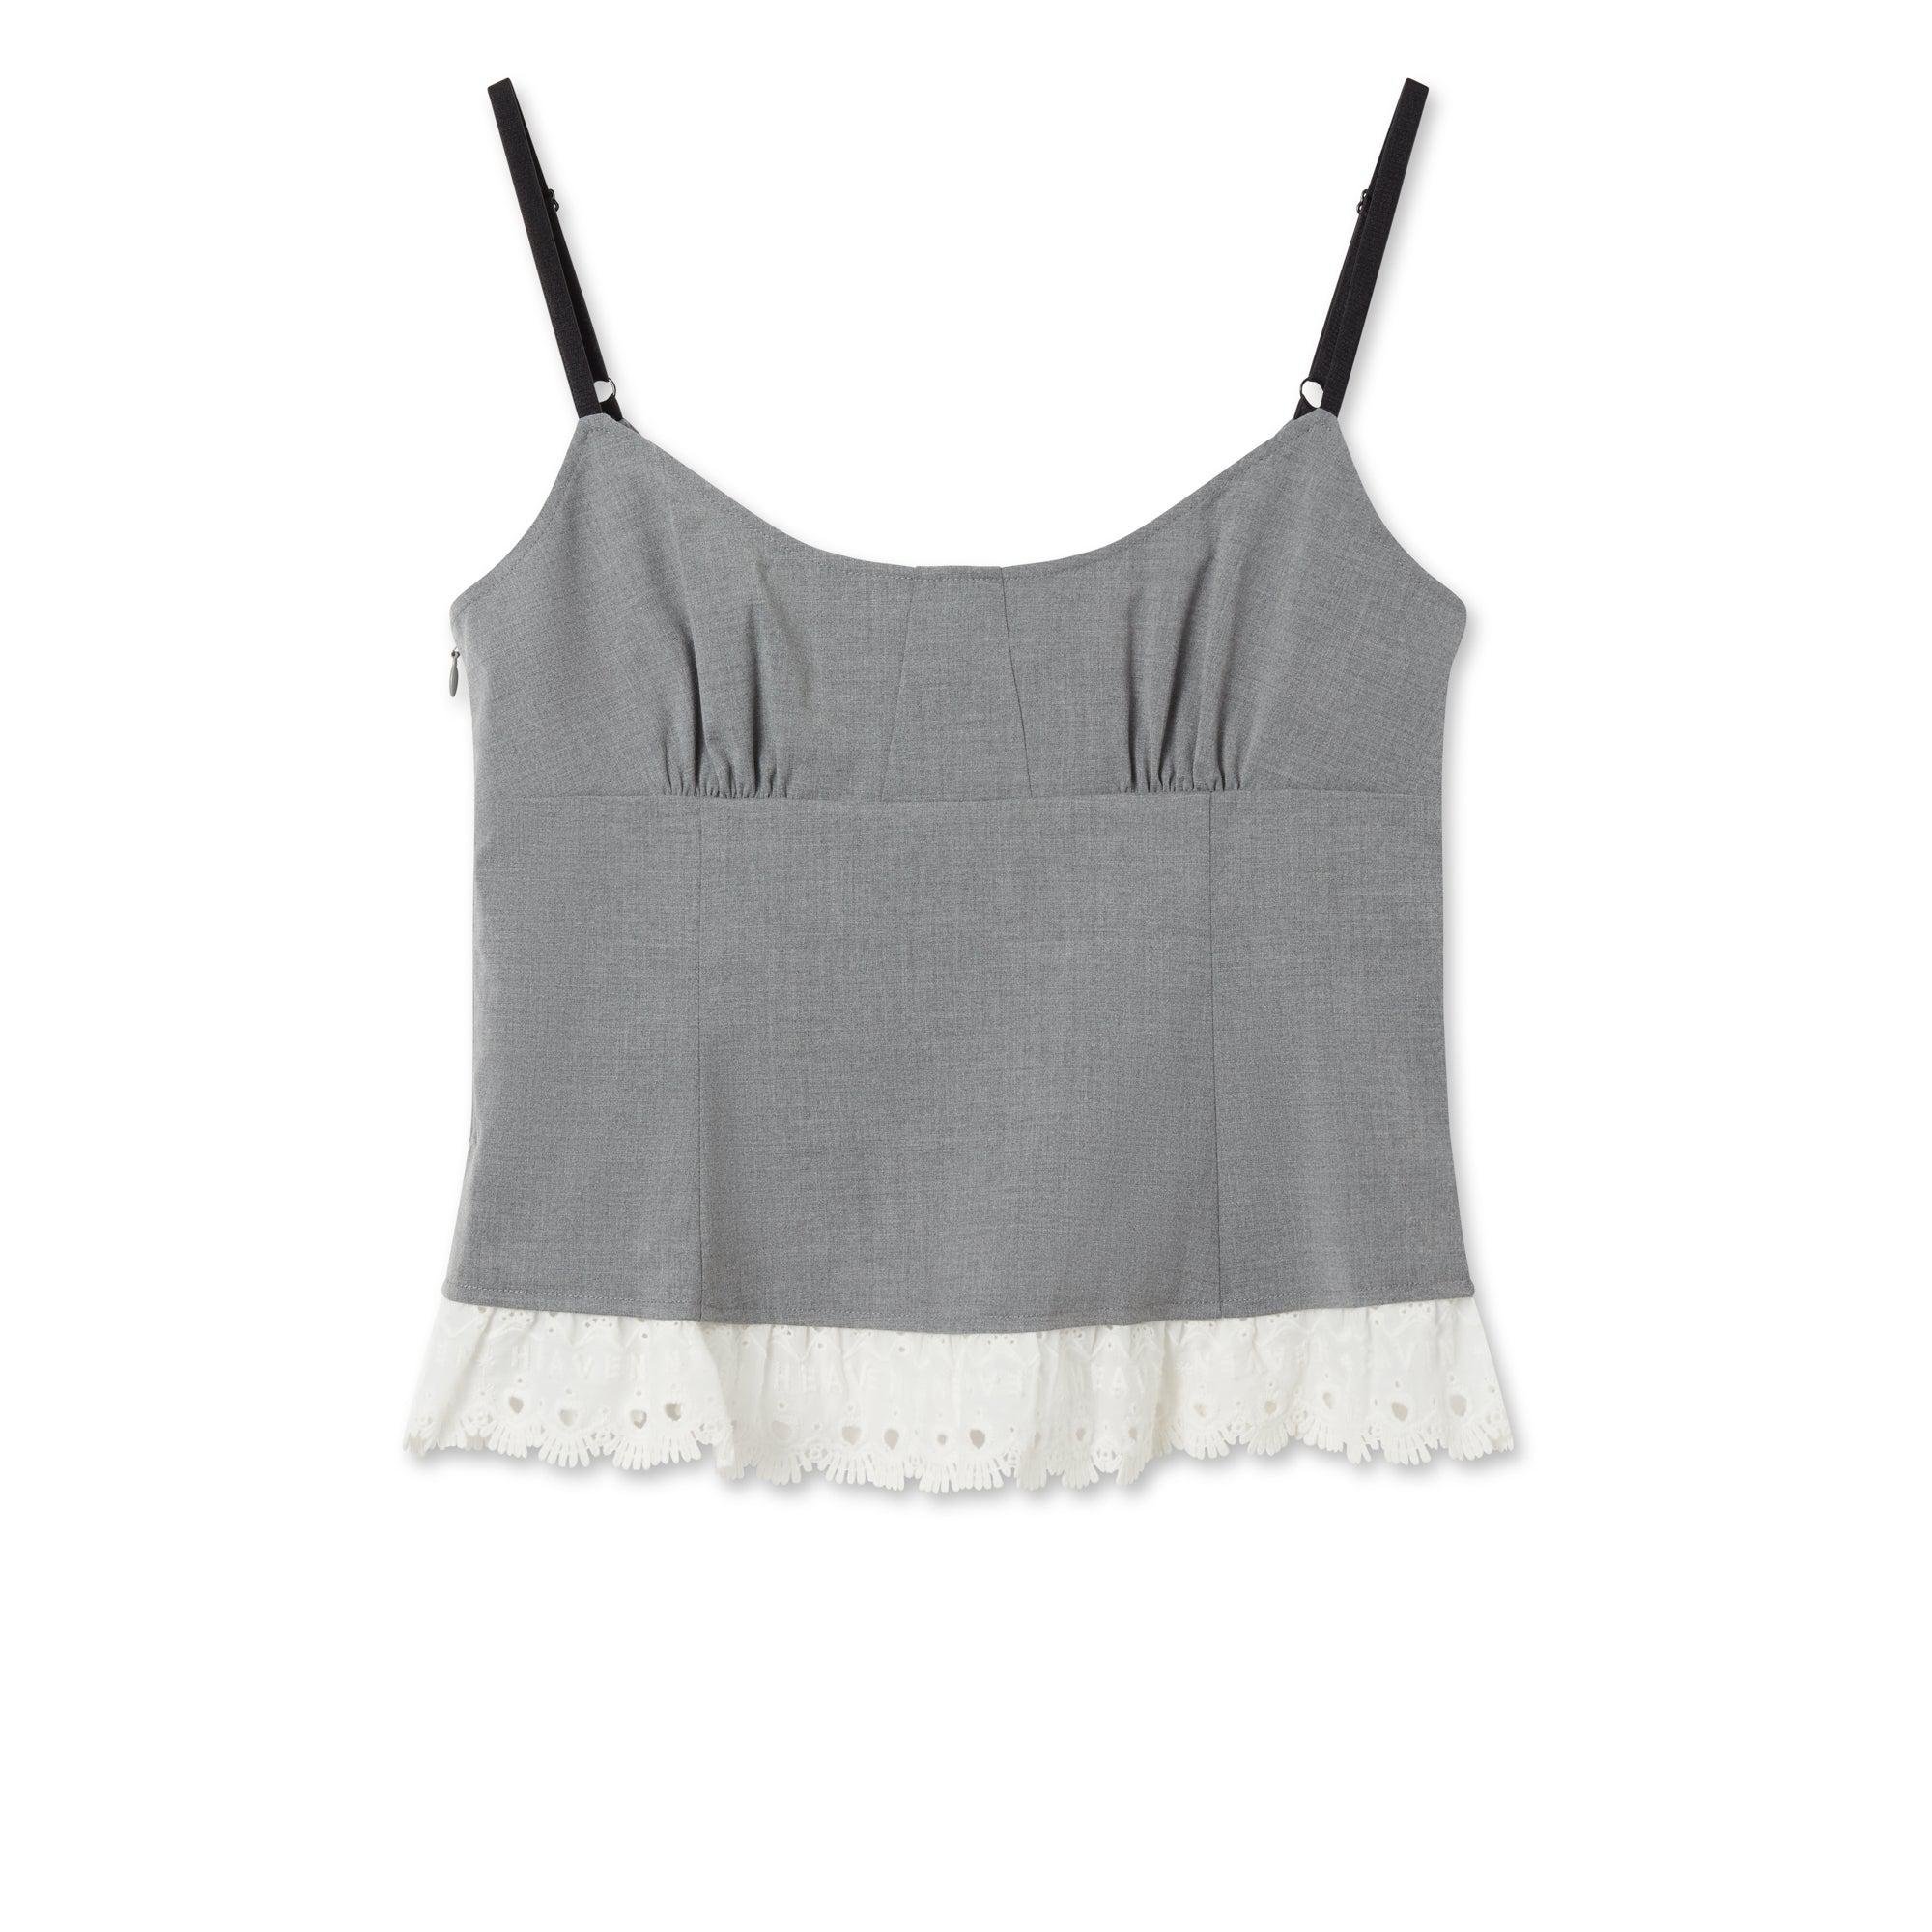 Women's Tailored Camisole